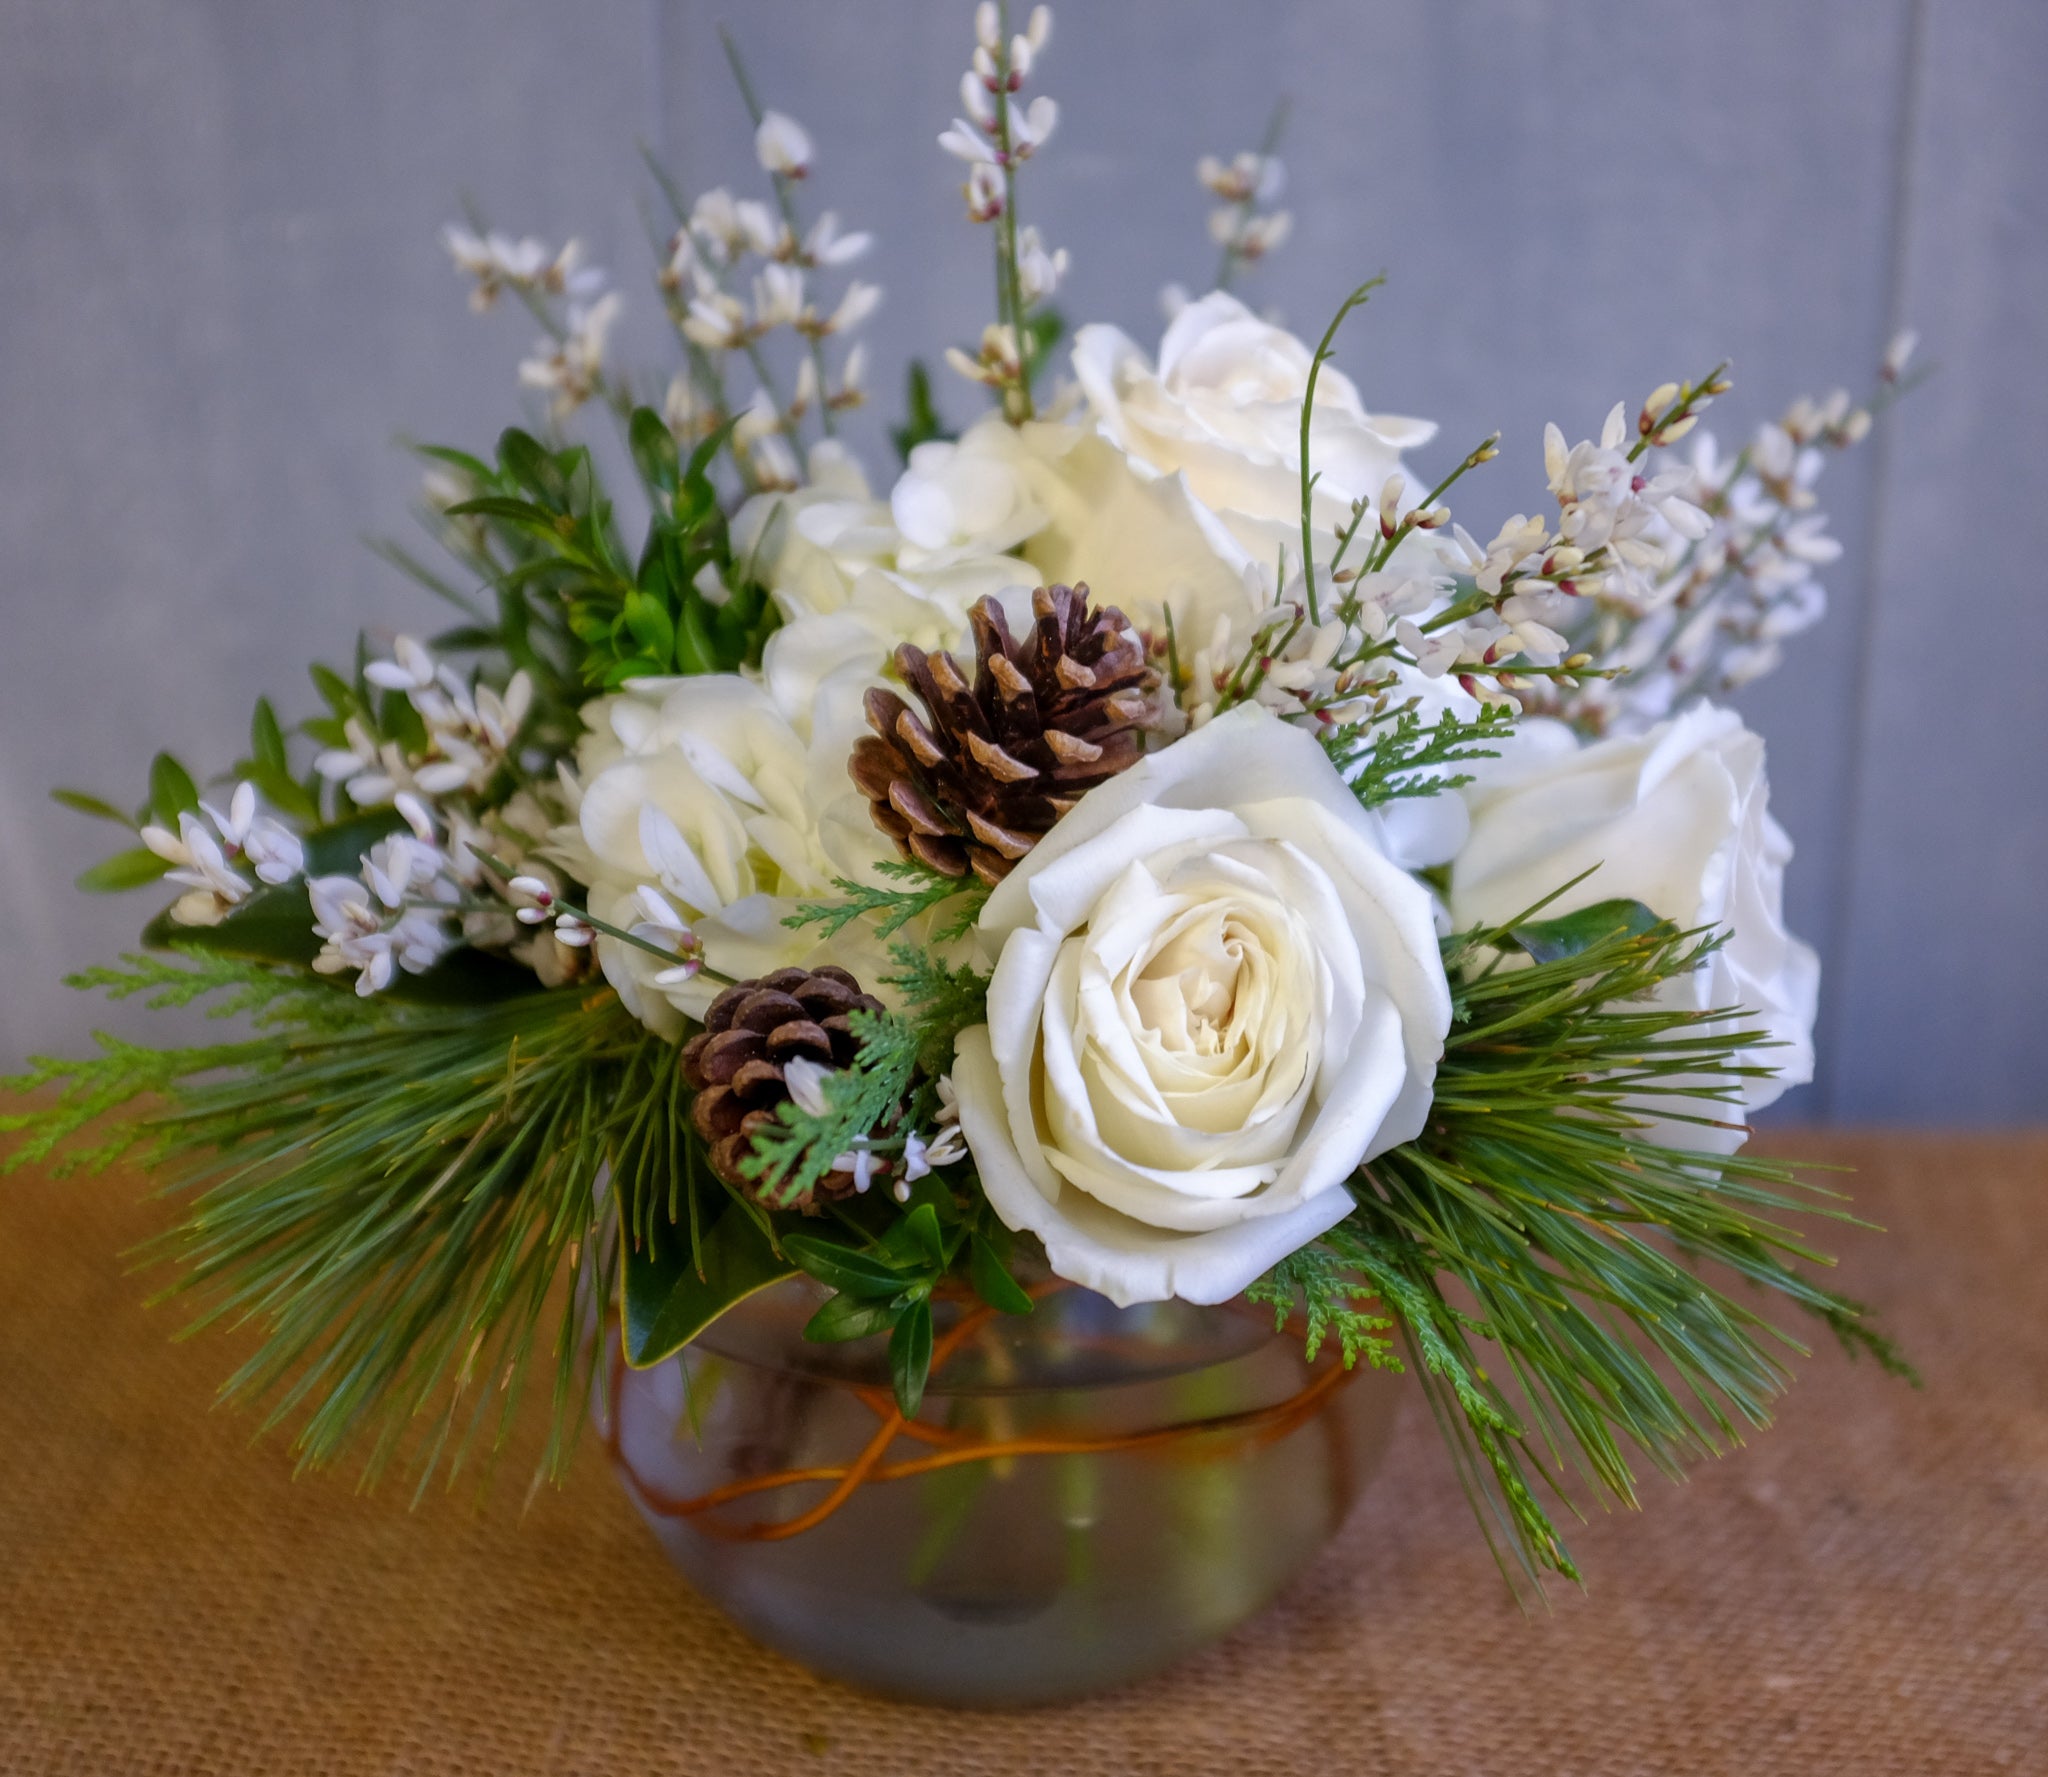 White winter flowers and evergreens and pinecones